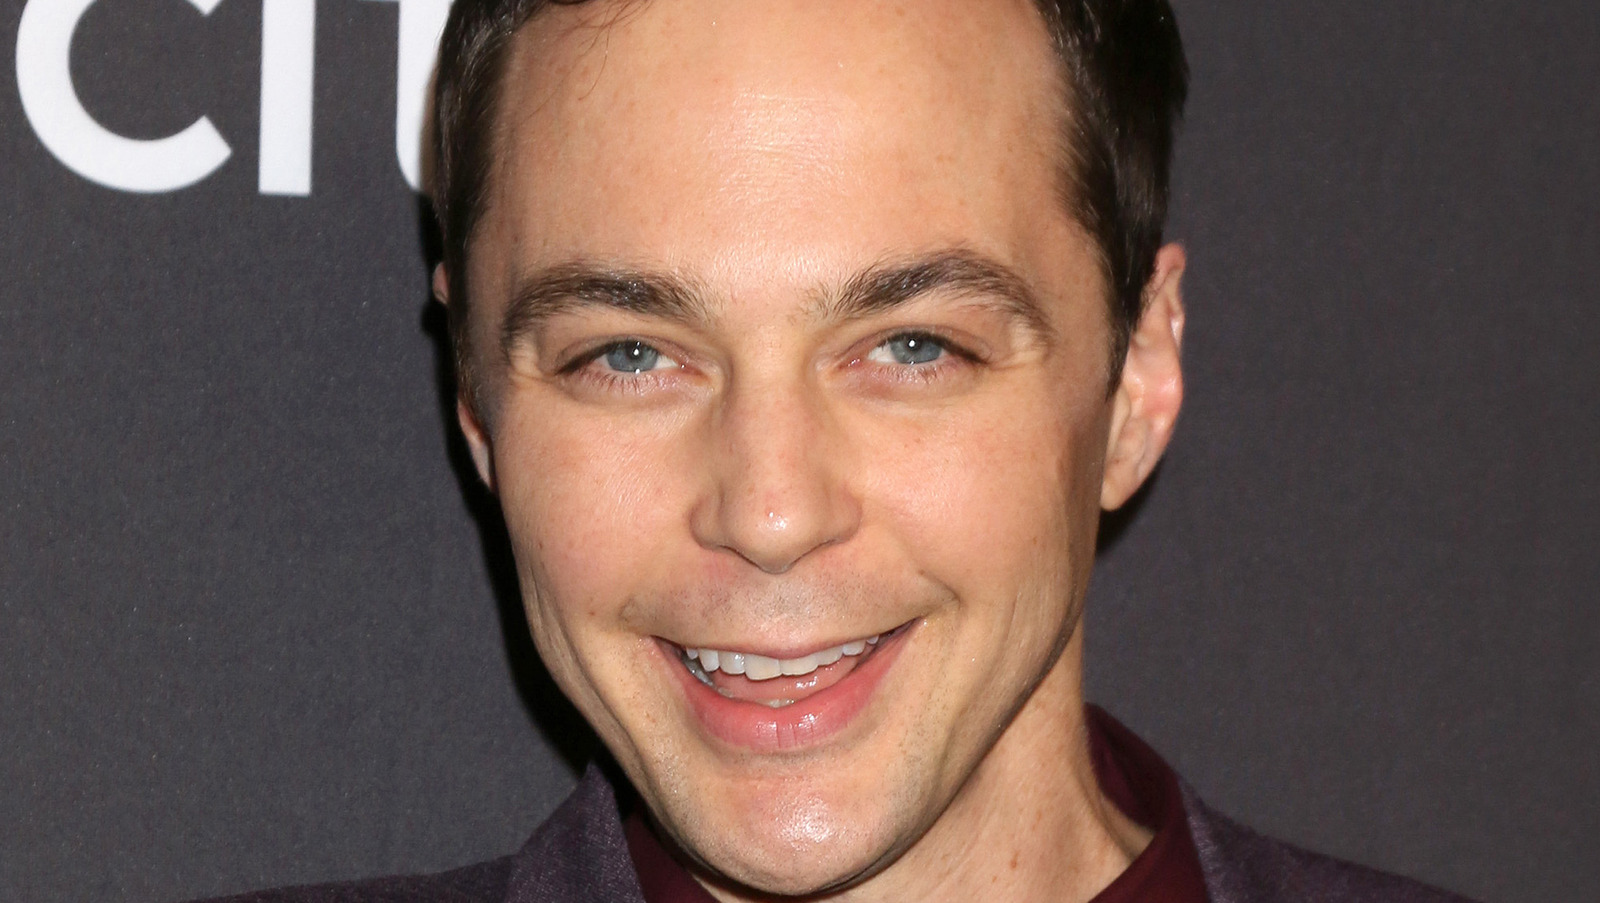 Here's The Real Person That Inspired Sheldon Cooper